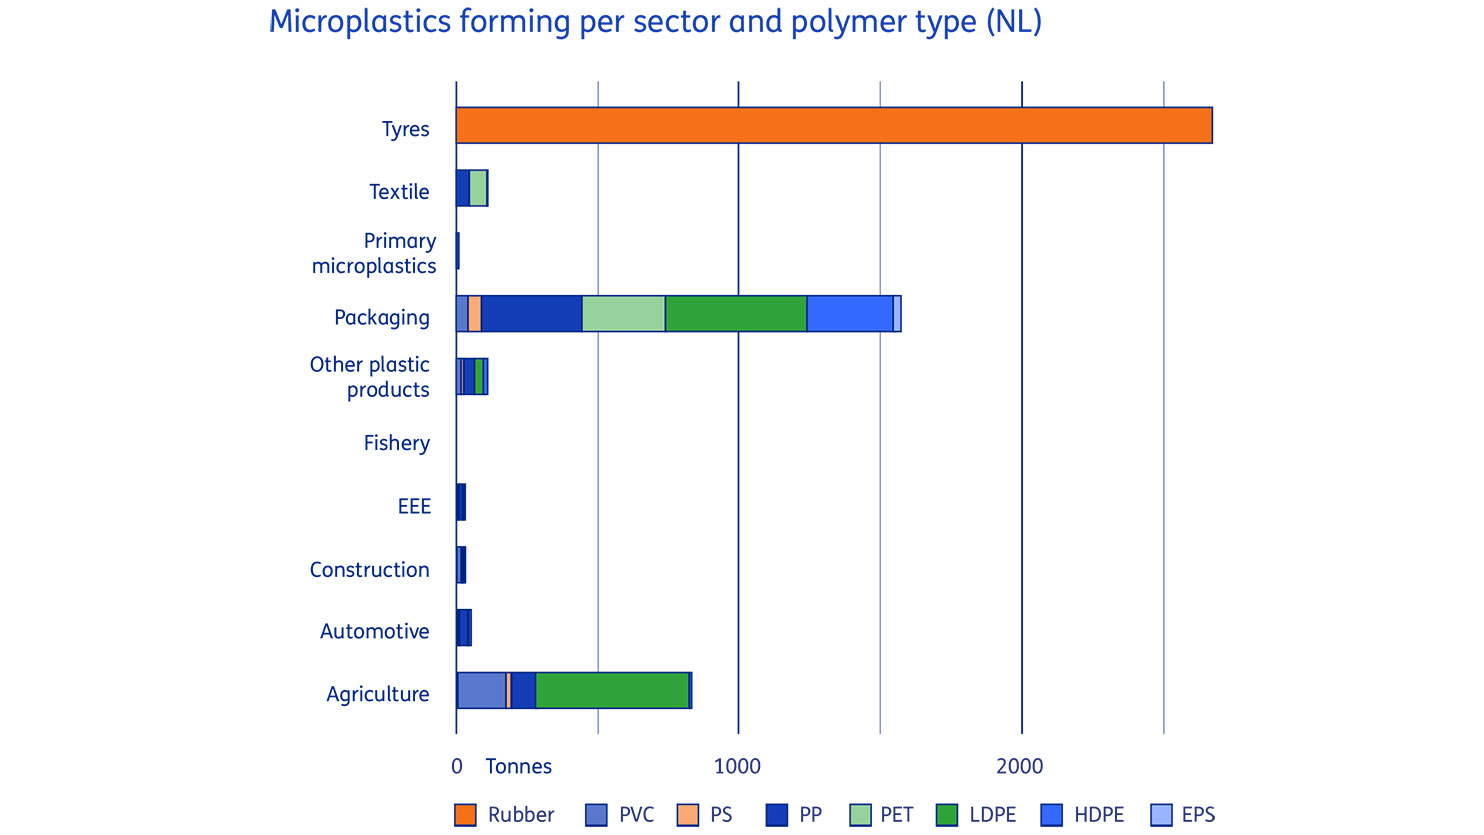 Microplastics forming per sector and polymer type (NL)